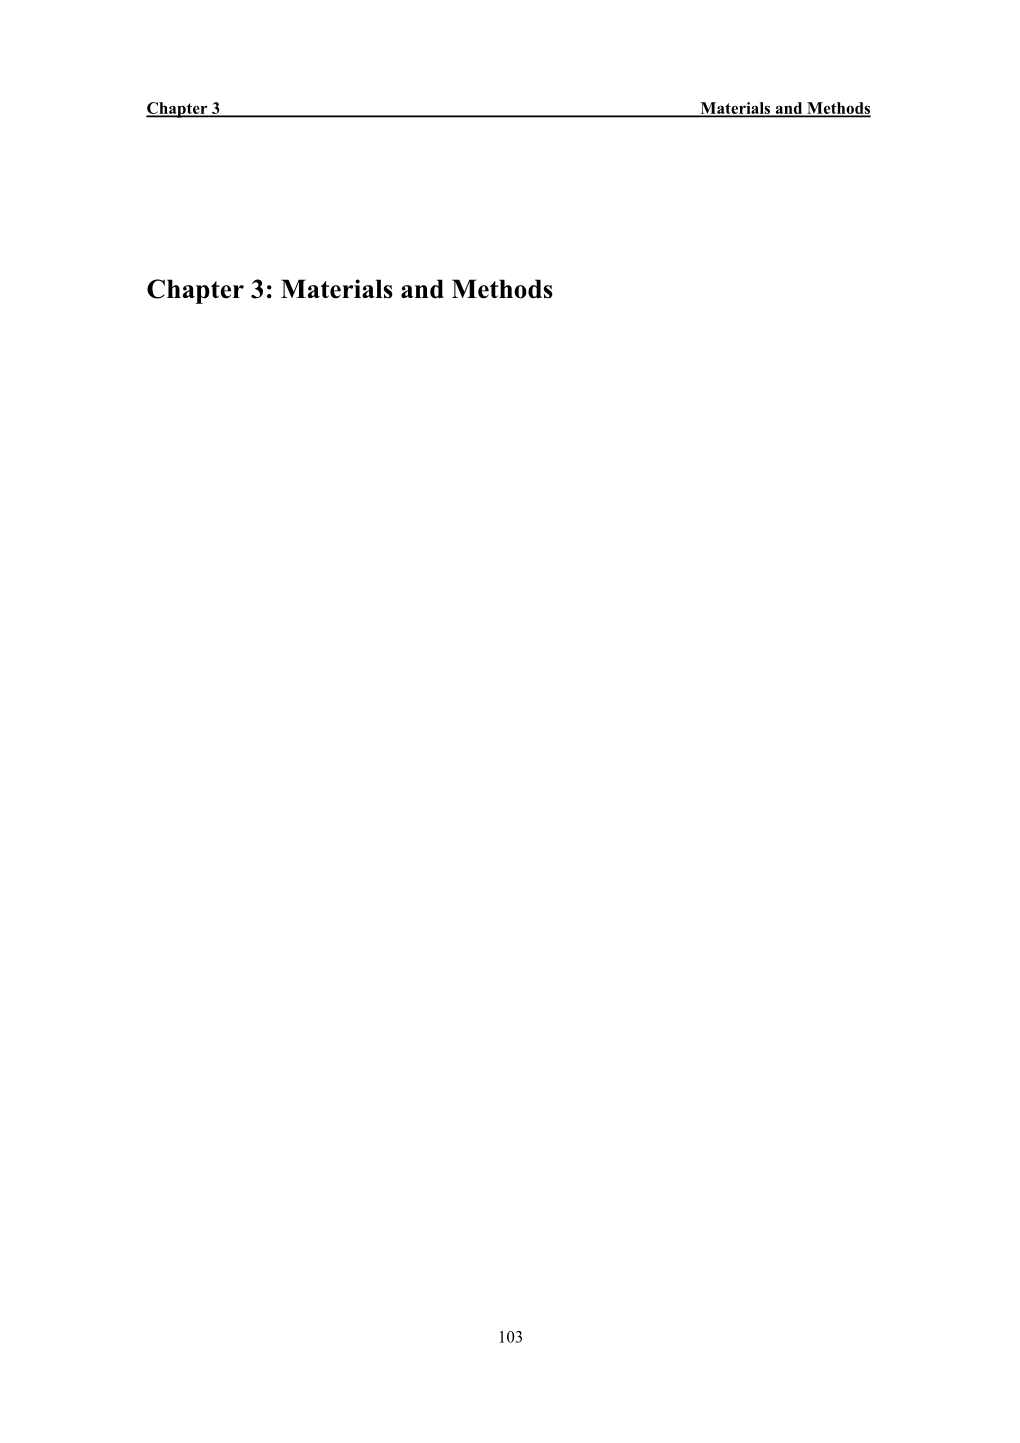 Chapter 3 Materials and Methods